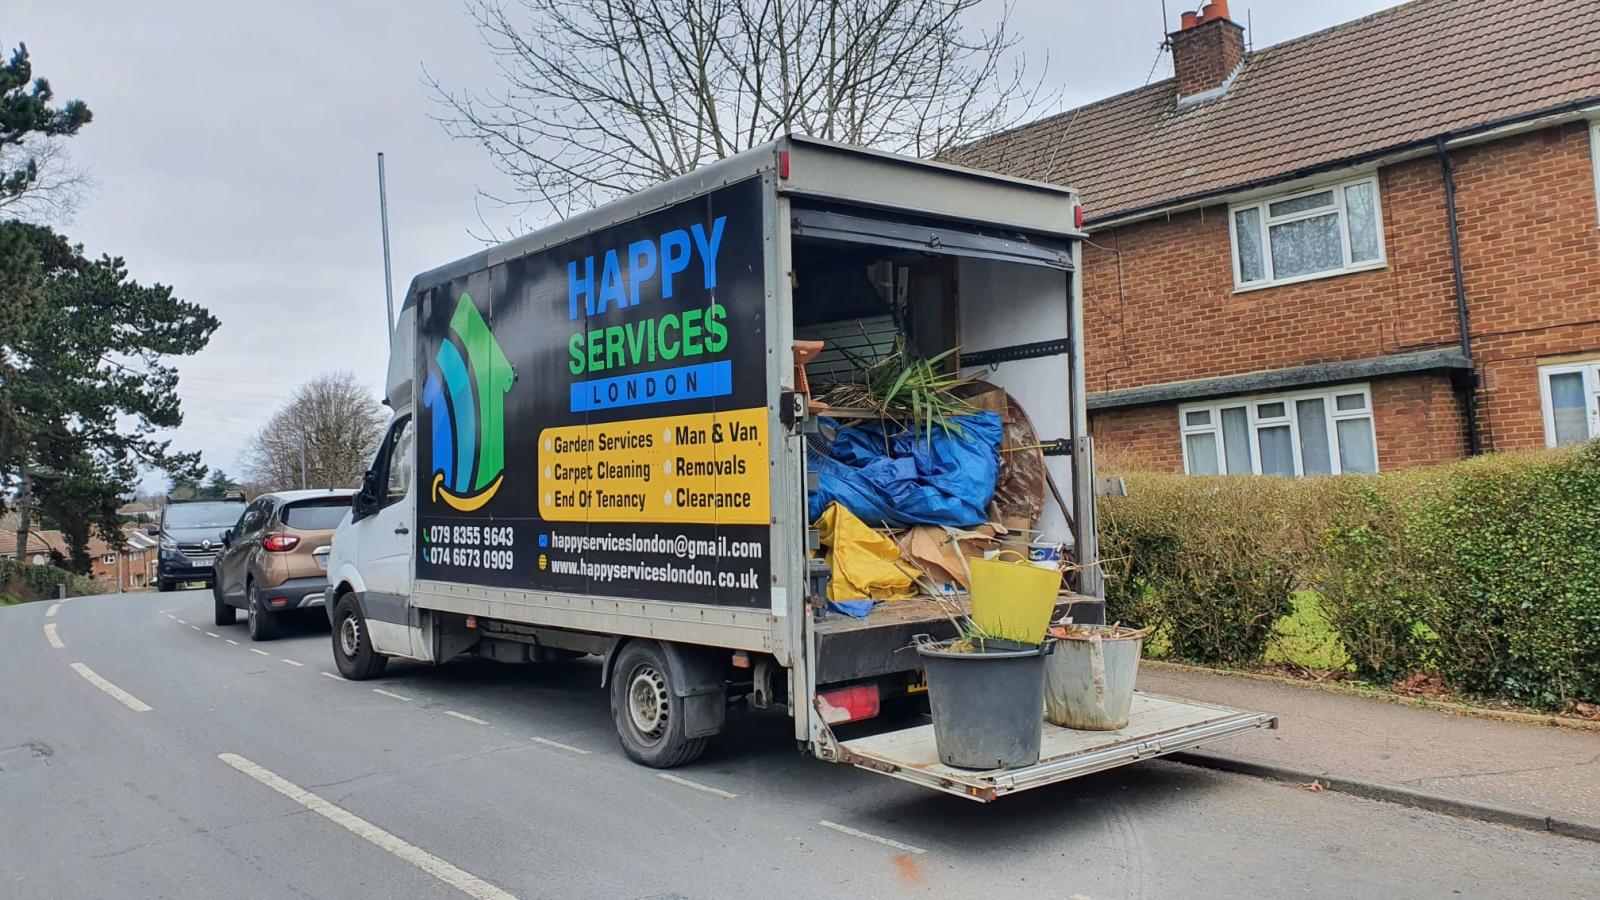 Garage Waste collection by Happy Services London